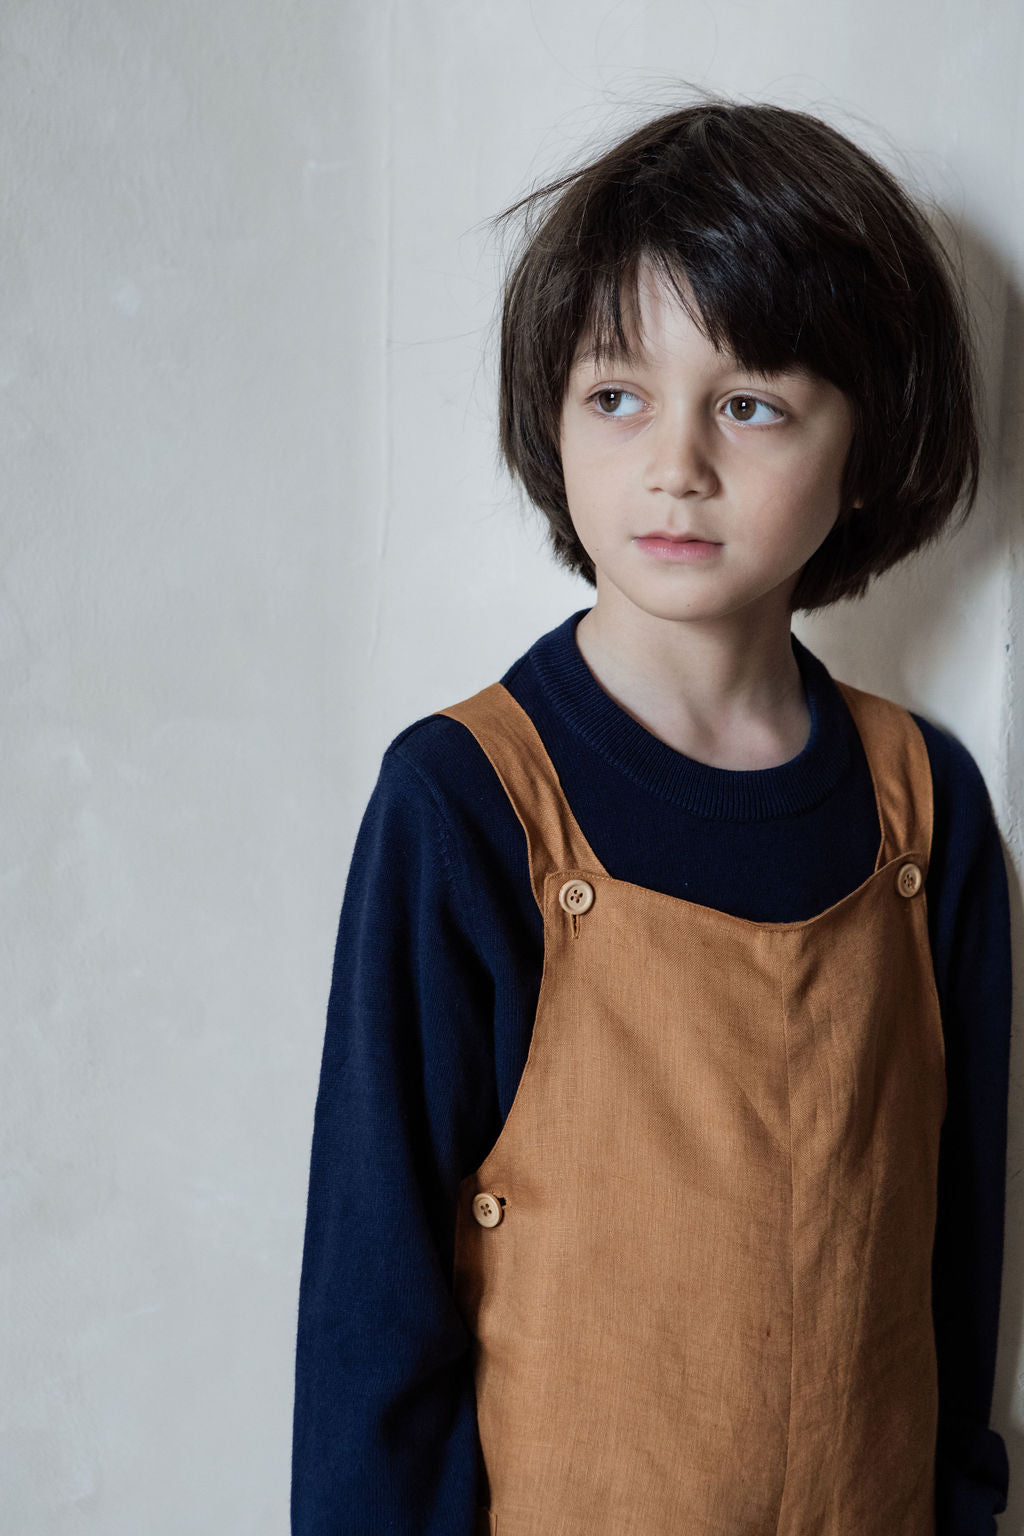 The Luca Dungarees